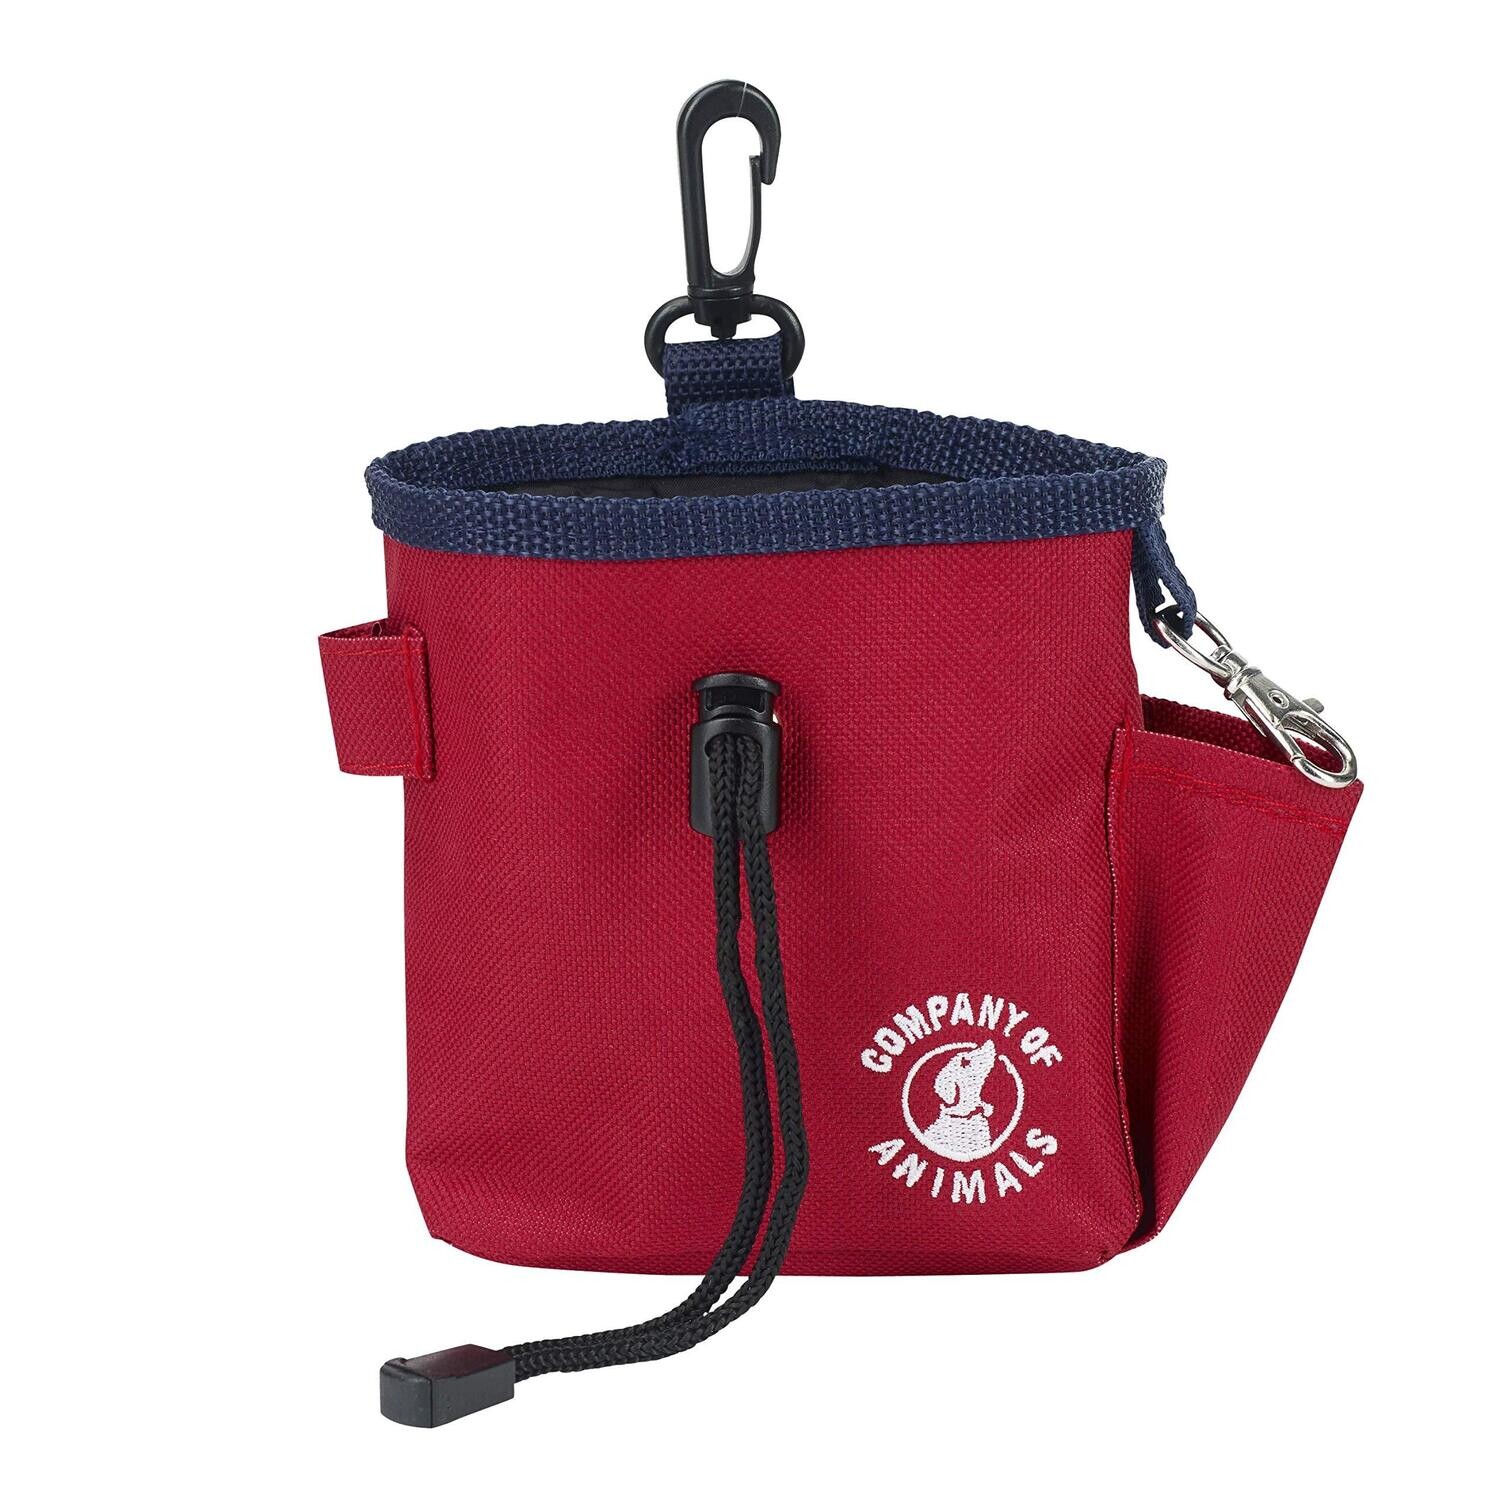 COMPANY OF ANIMALS TREAT BAG RED